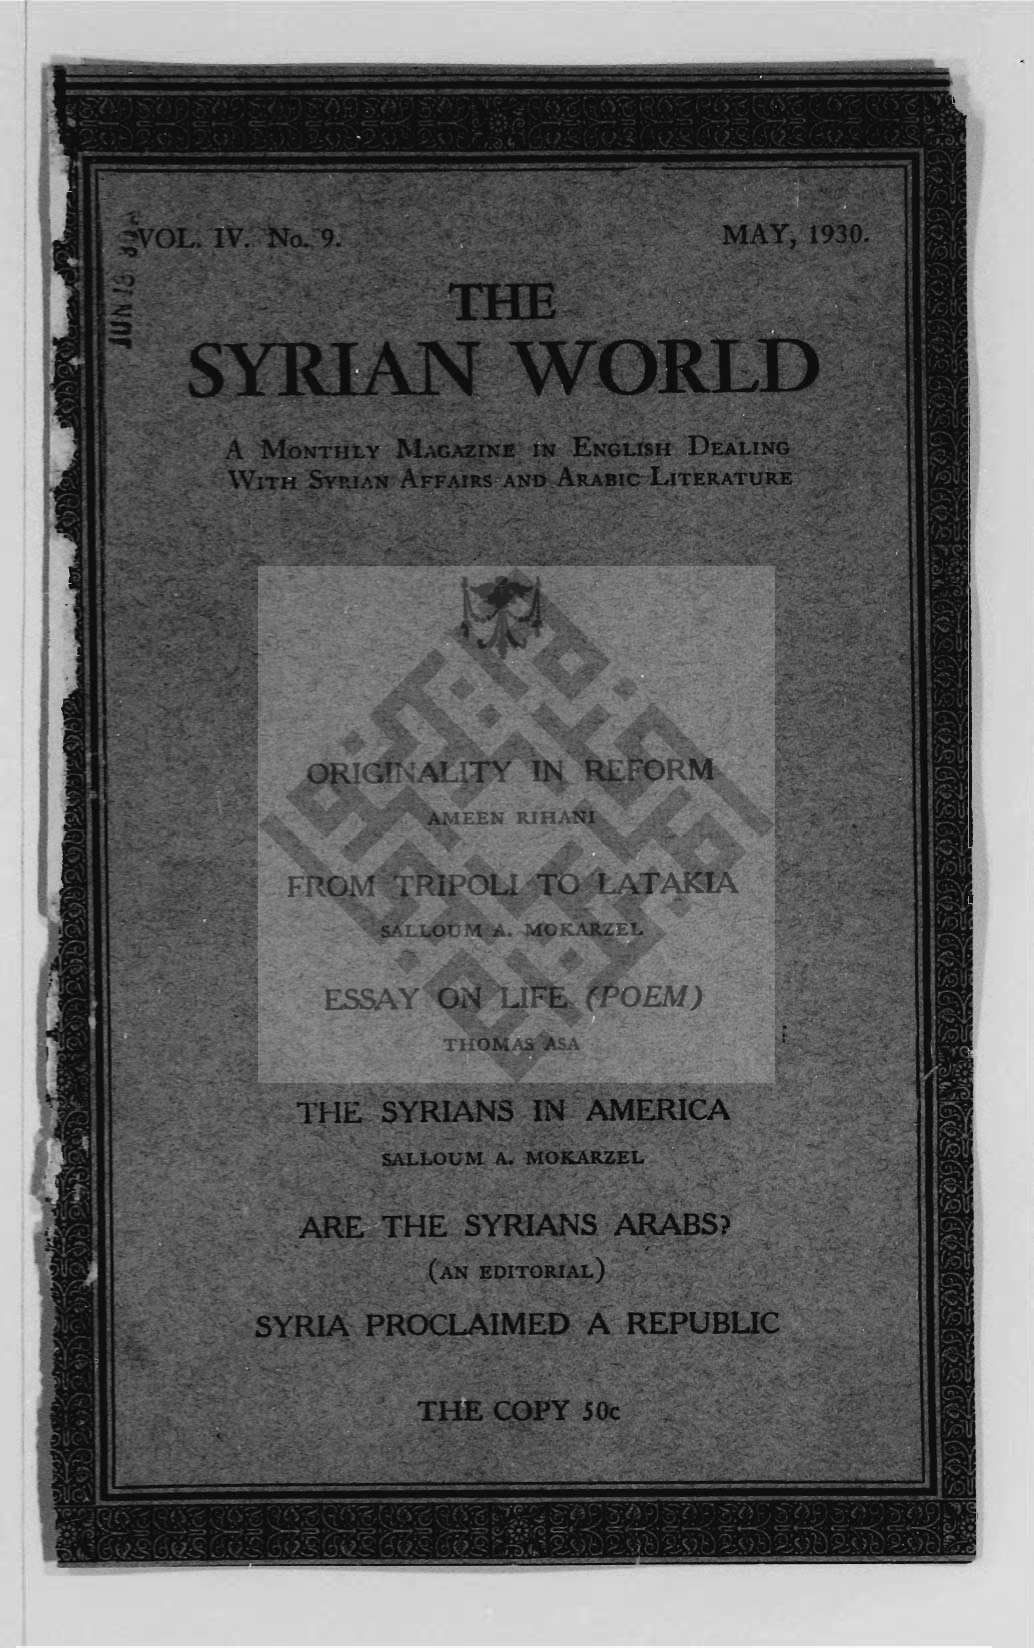 On the Art of Writing, The Syrian World, 4, 9, May 1930